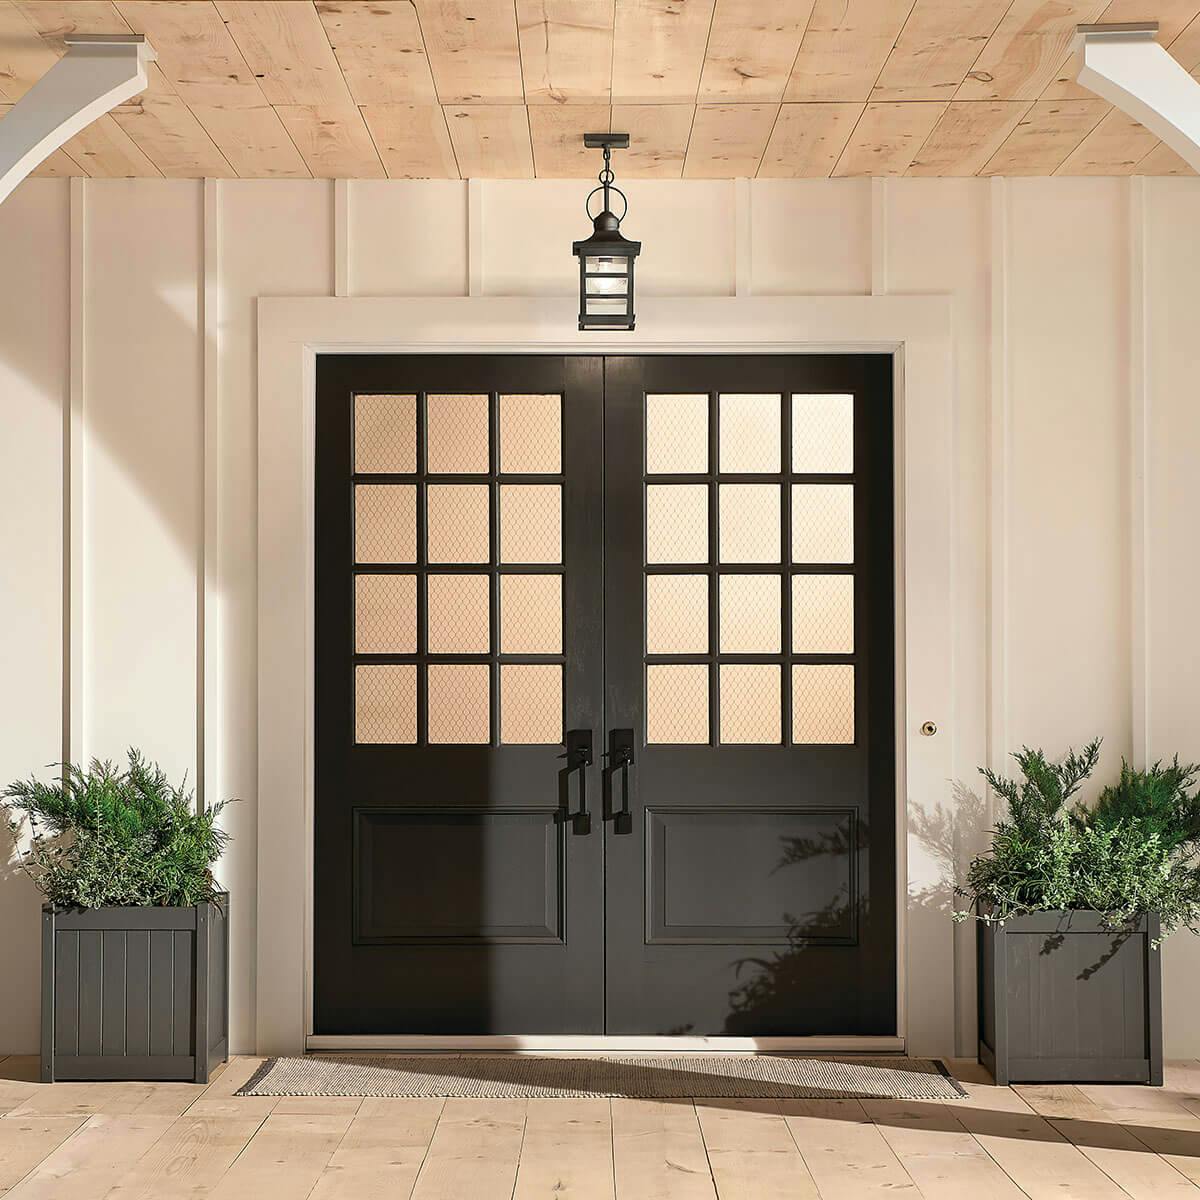 Day time outdoor entryway image featuring Grand Ridge pendant 39538